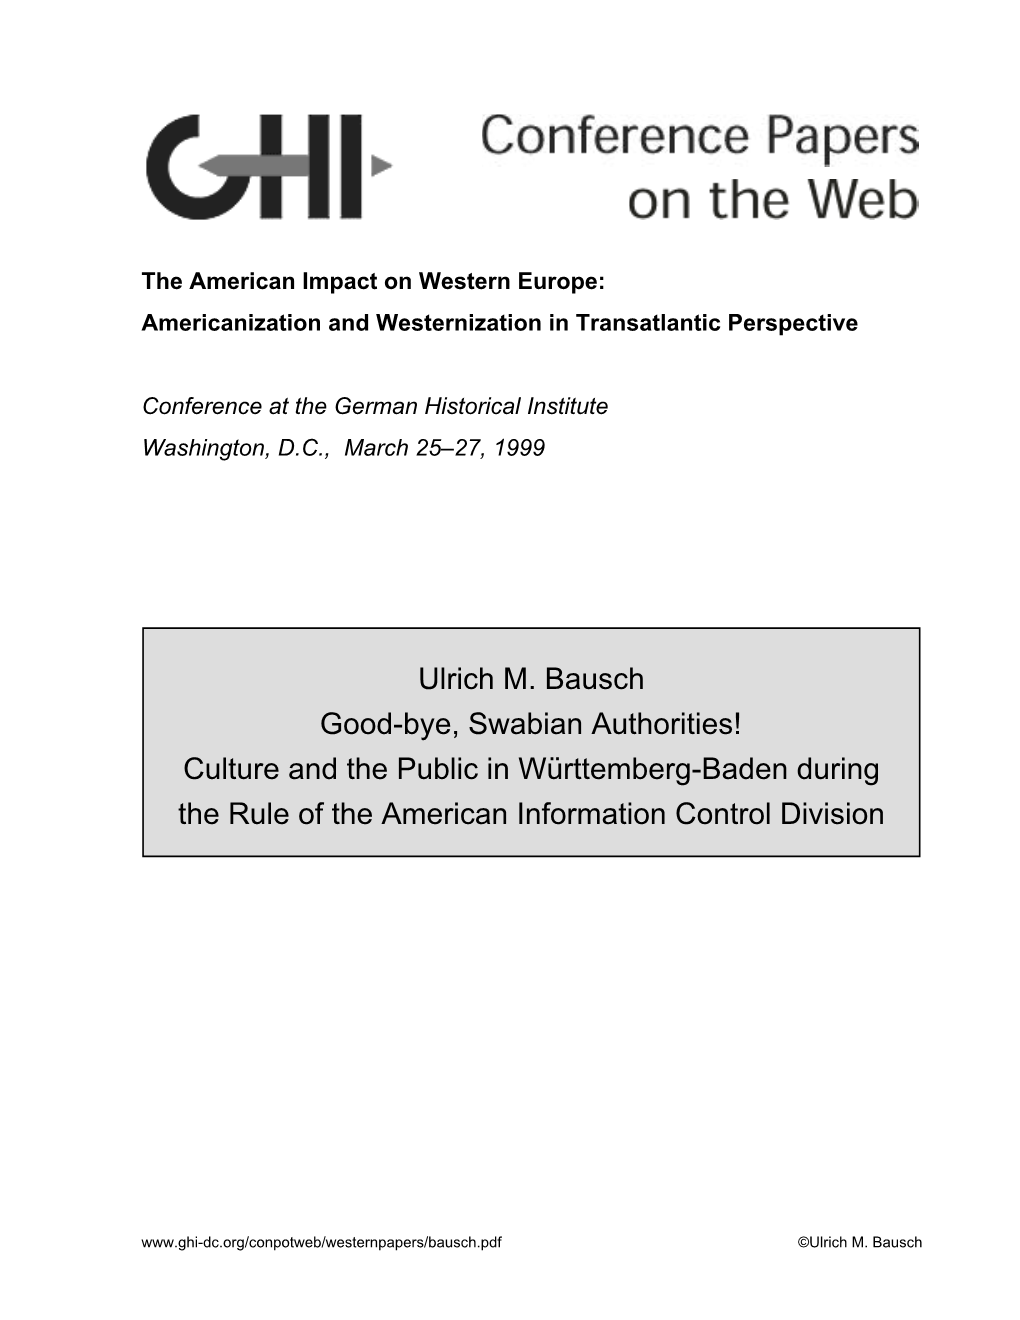 Ulrich M. Bausch Good-Bye, Swabian Authorities! Culture and the Public in Württemberg-Baden During the Rule of the American Information Control Division